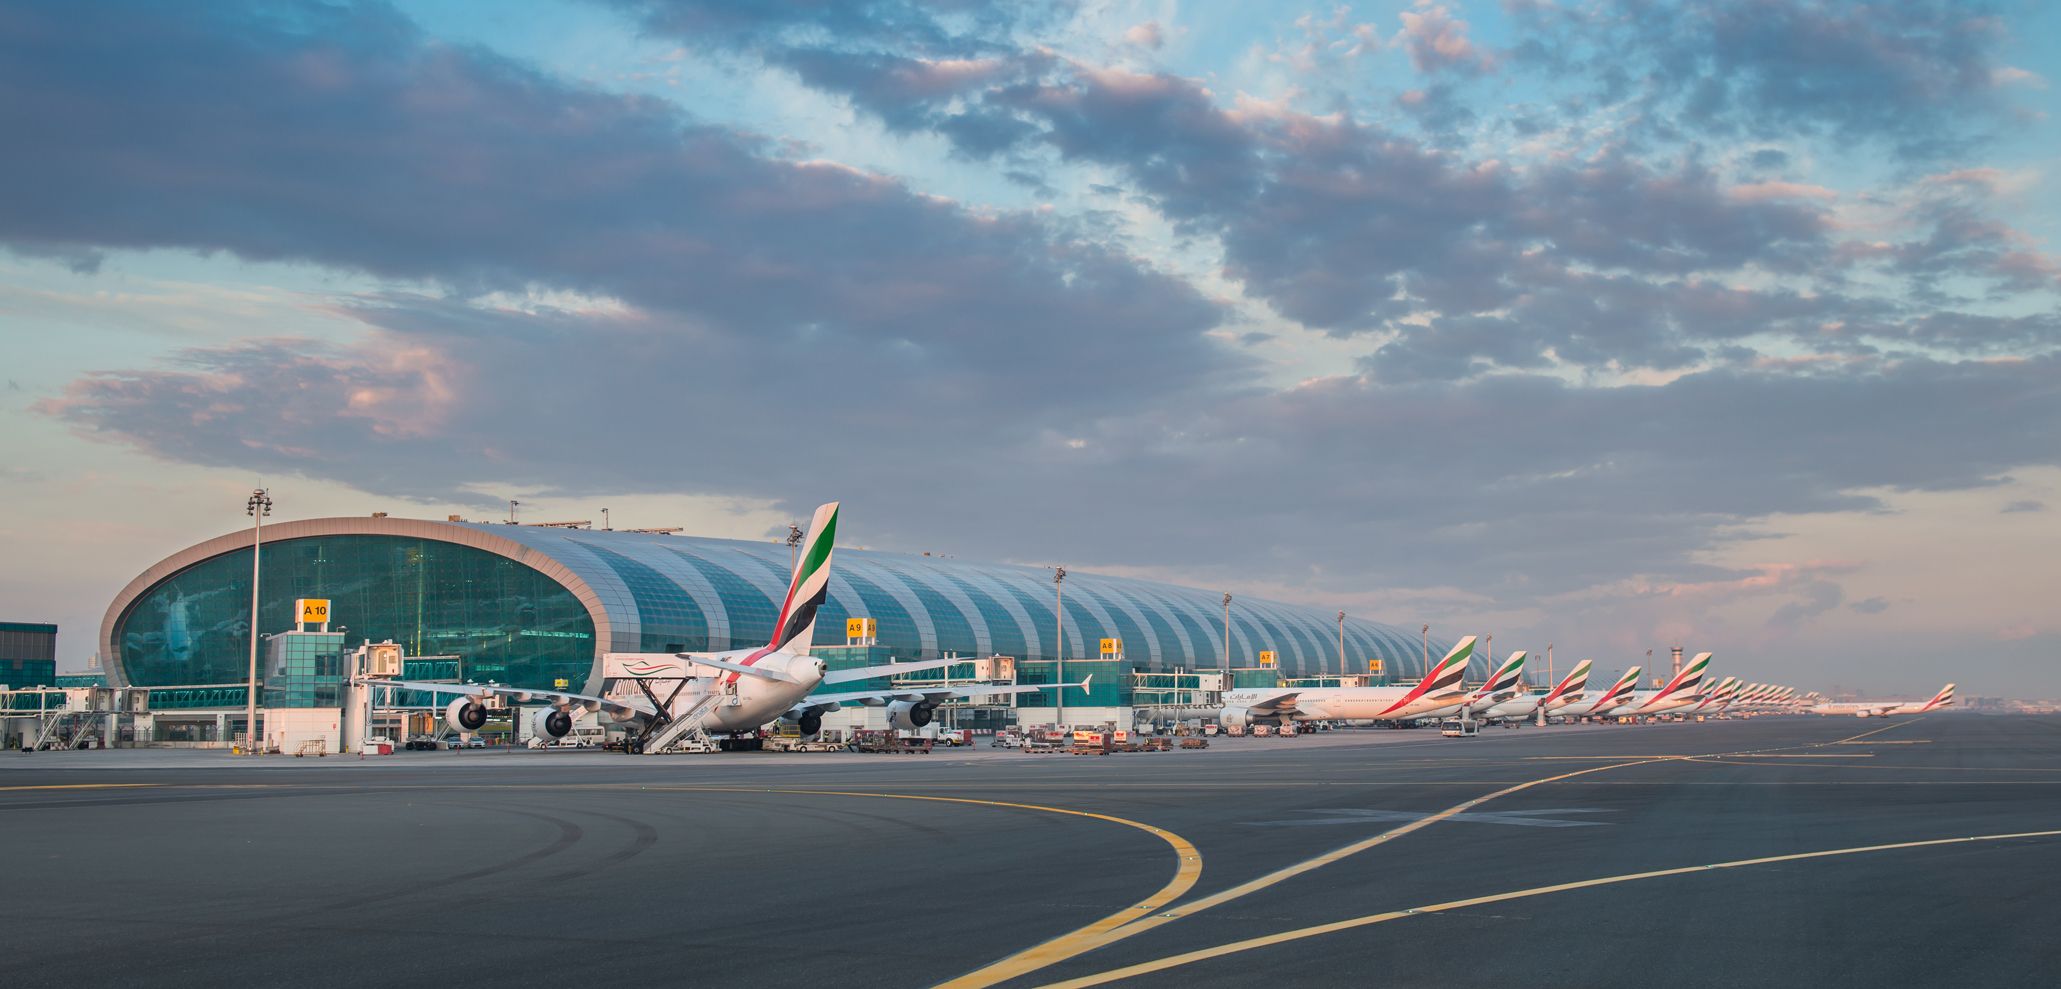 A Panoramic view of Dubai International Airport with several Emirates aircraft parked at gates.